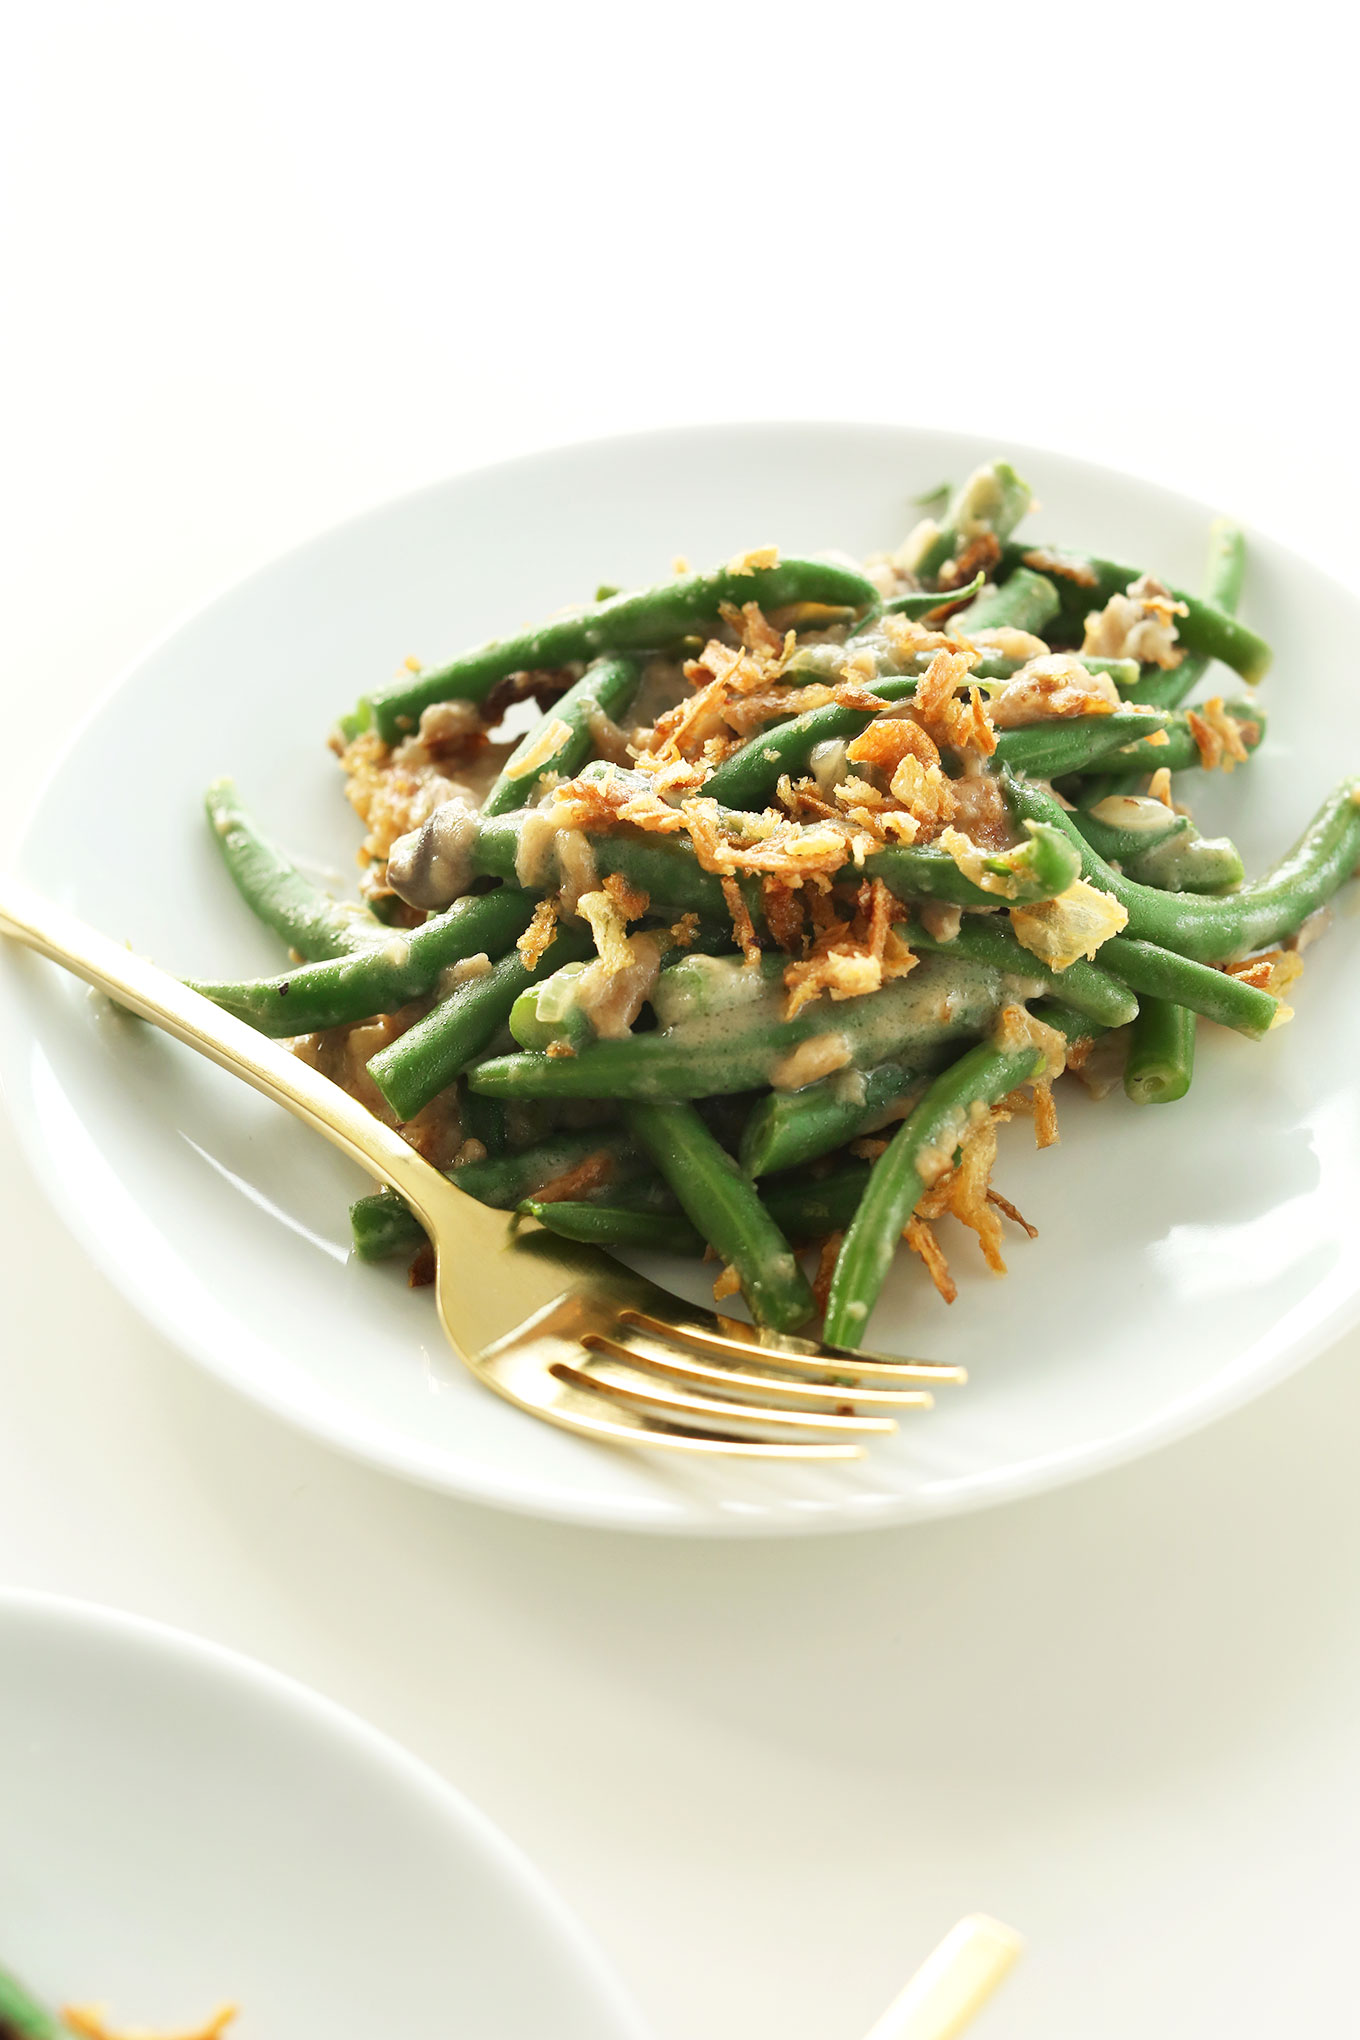 Plate of our creamy and delicious Vegan Green Bean Casserole recipe